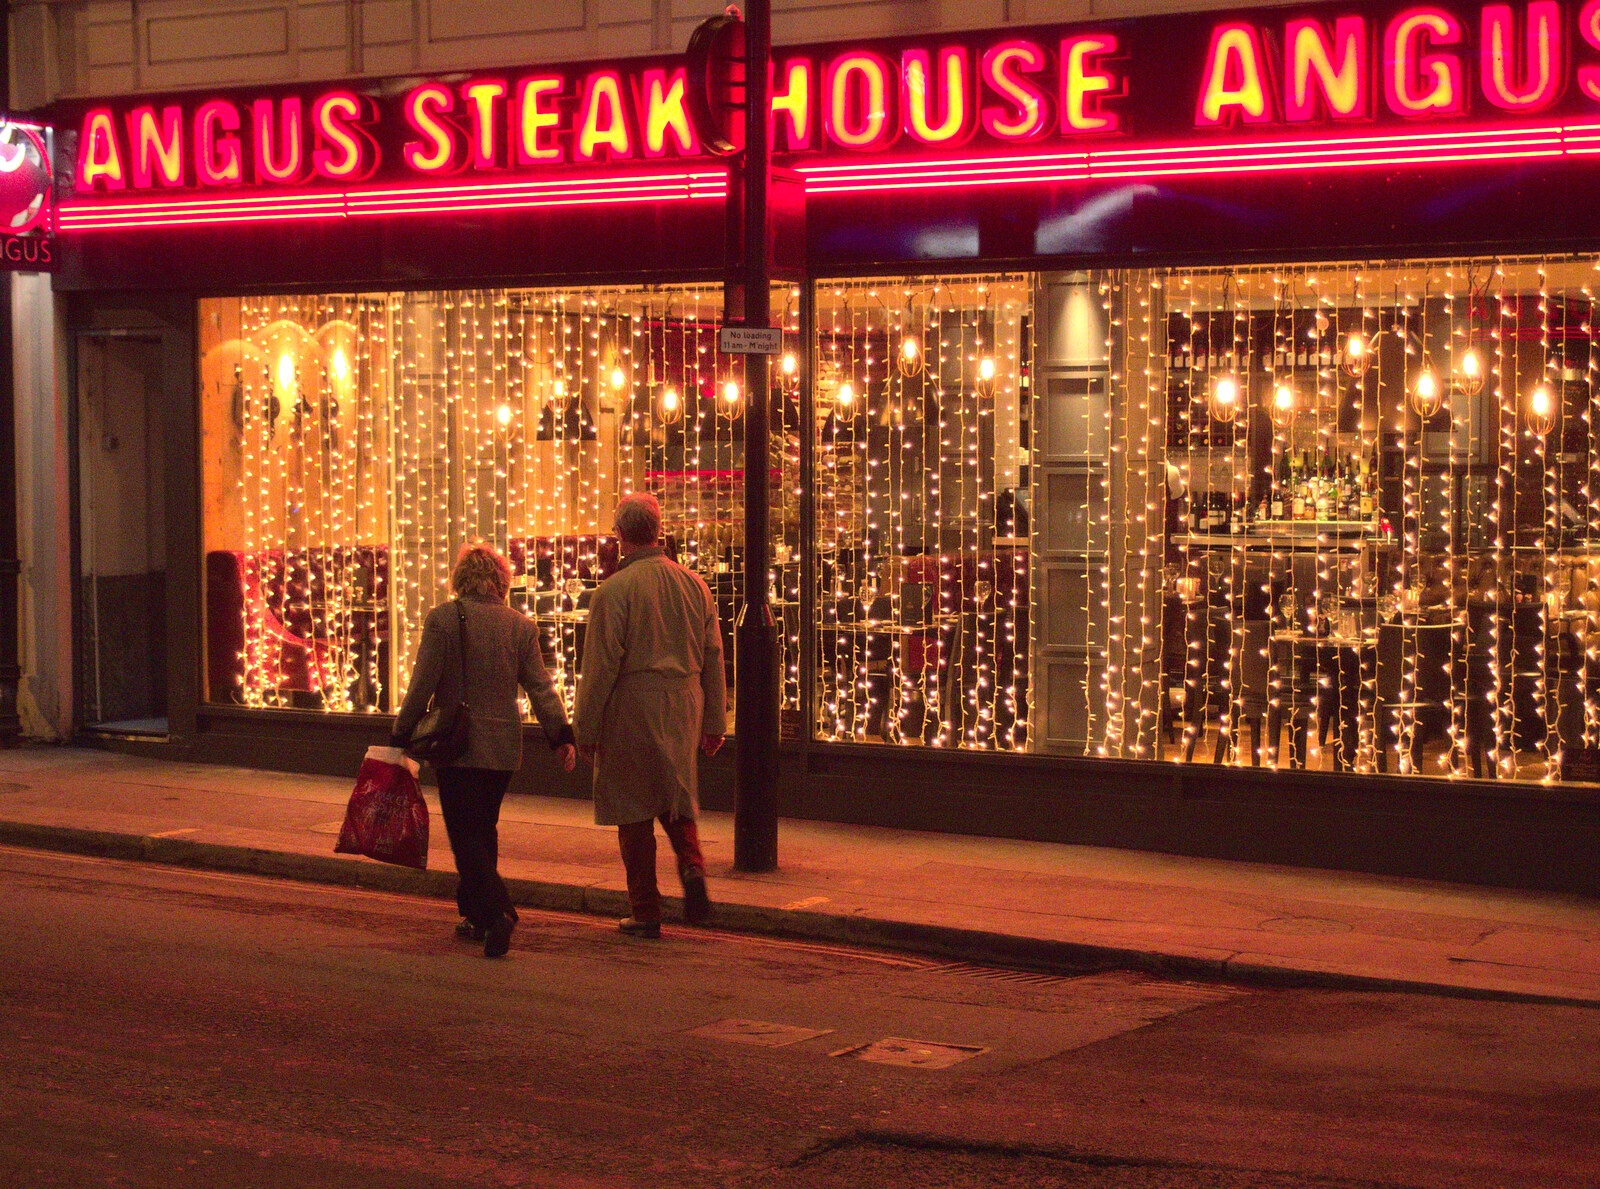 Strings of lights in Angus Steak House from SwiftKey Innovation Nights, Westminster, London - 19th December 2014